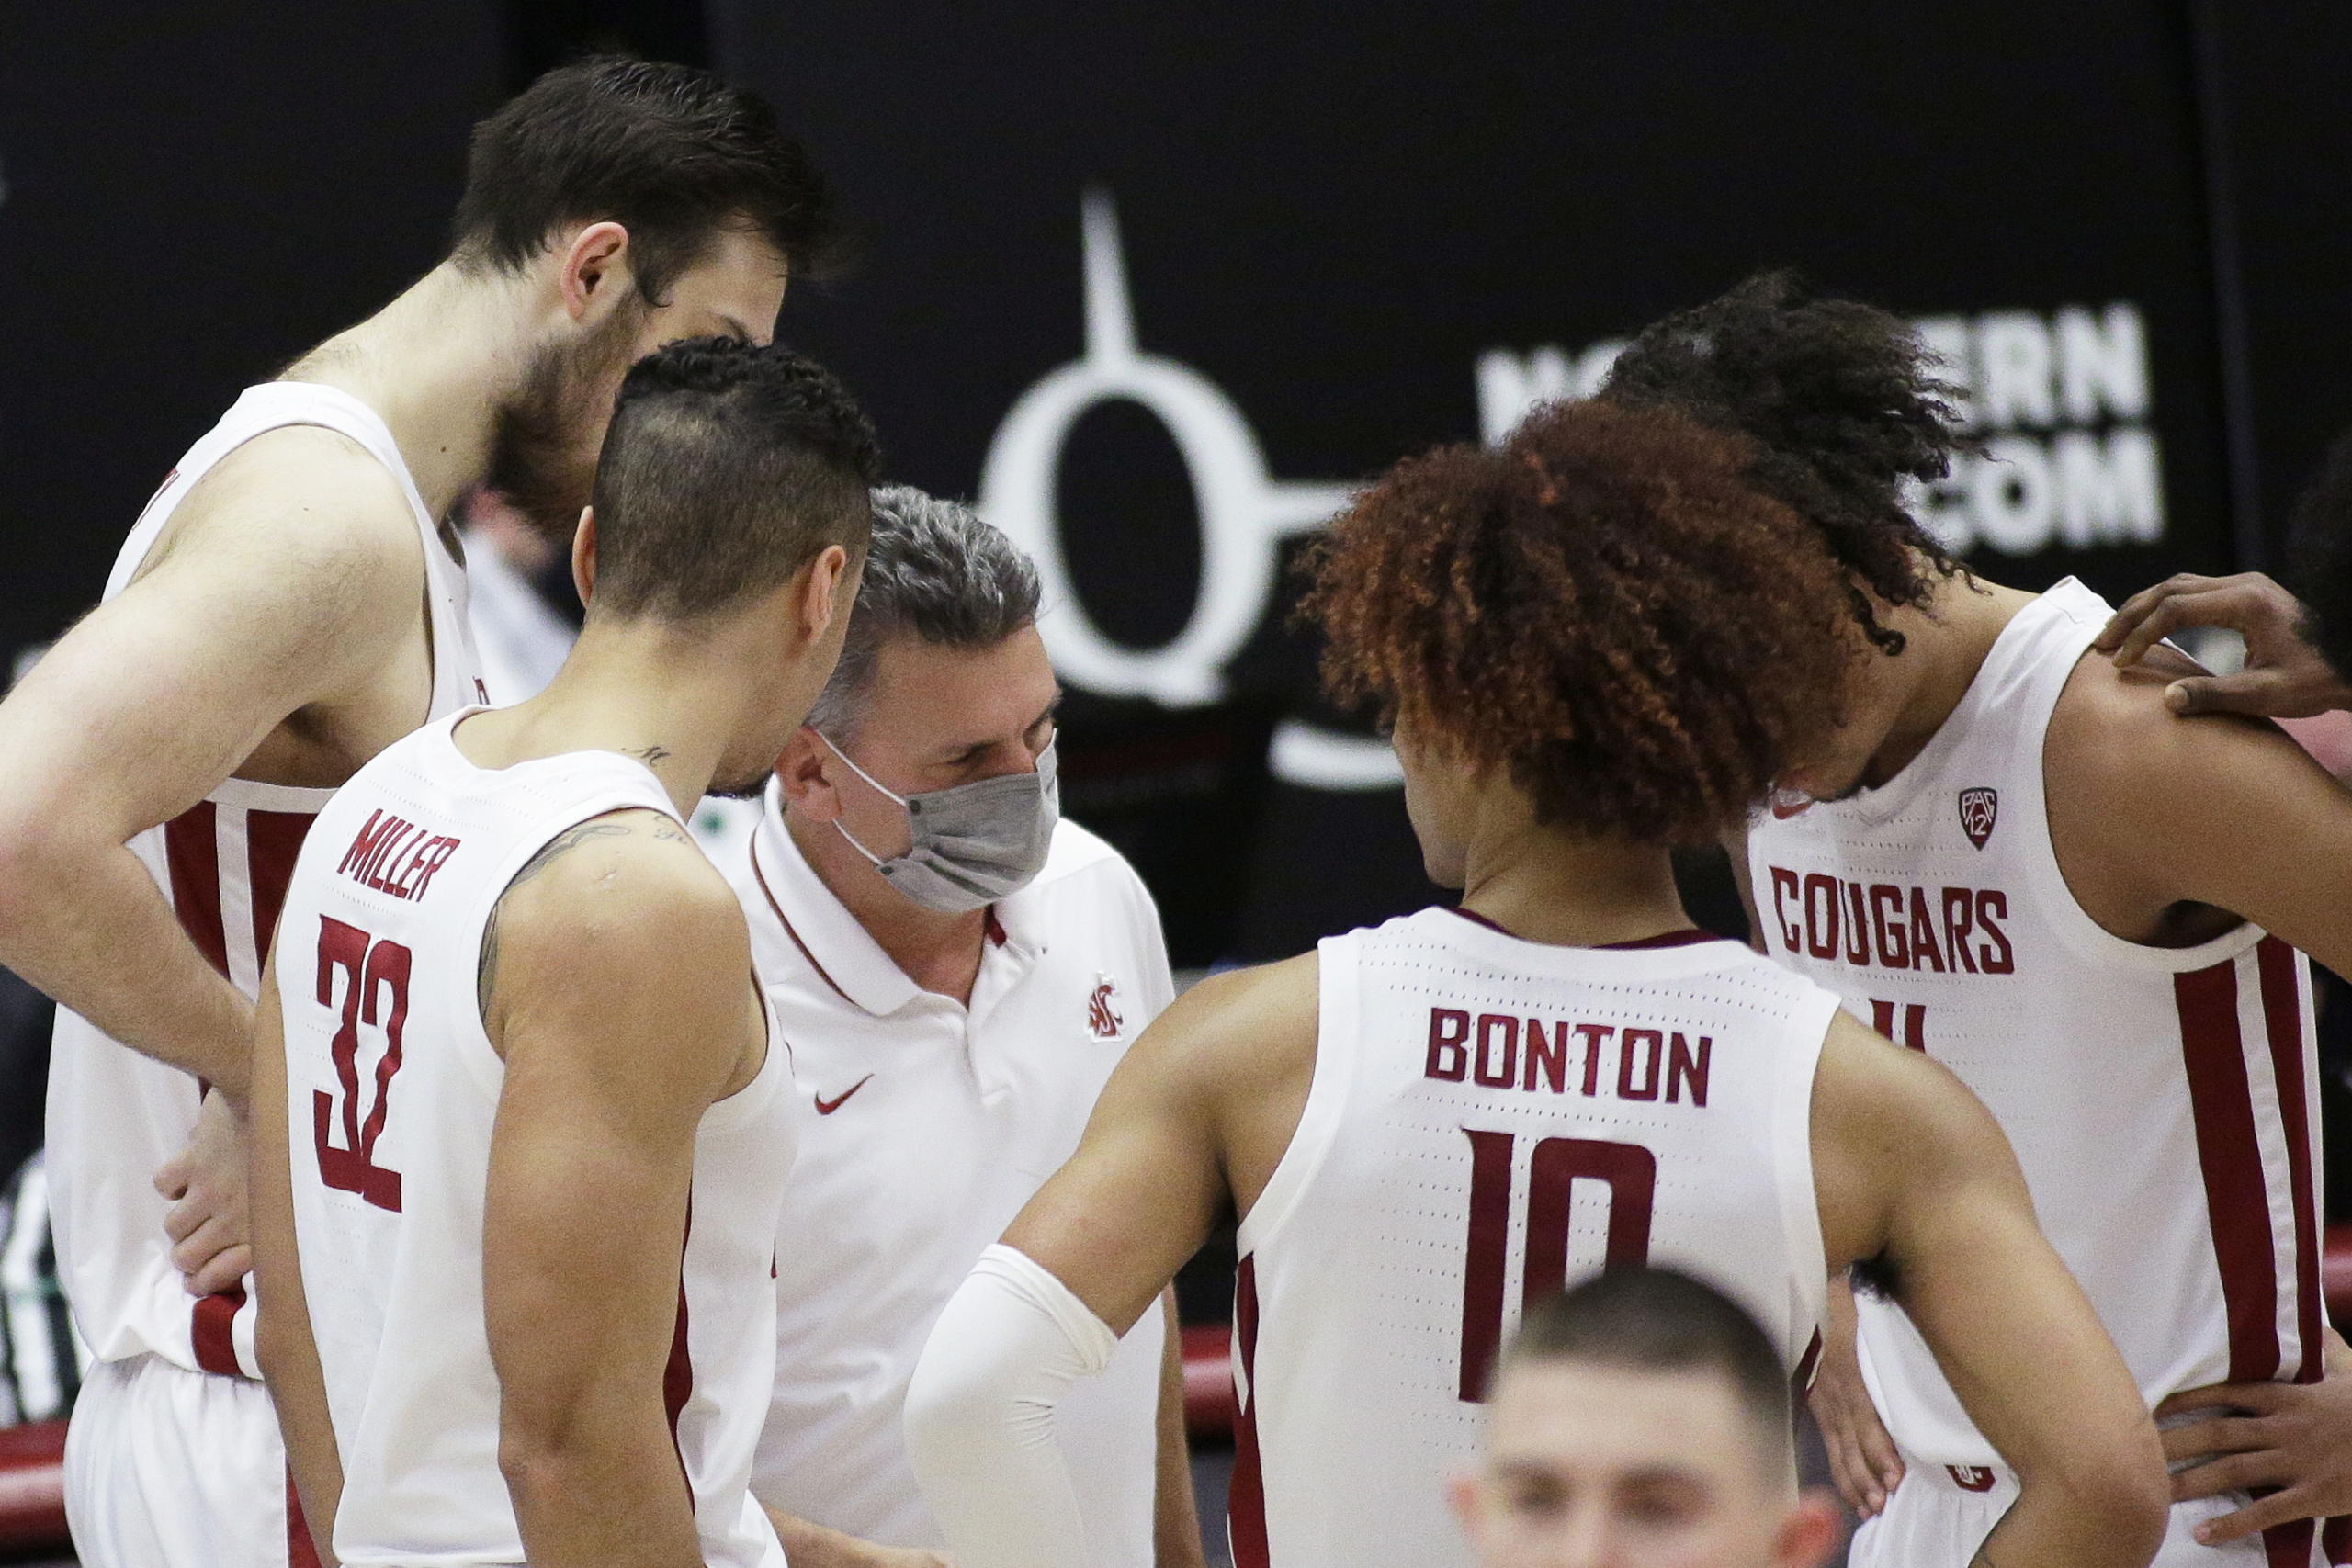 Washington State coach Kyle Smith, center, talks to the team during a break in play in the second half of an NCAA college basketball game against Utah in Pullman, Wash., Thursday, Jan. 21, 2021.